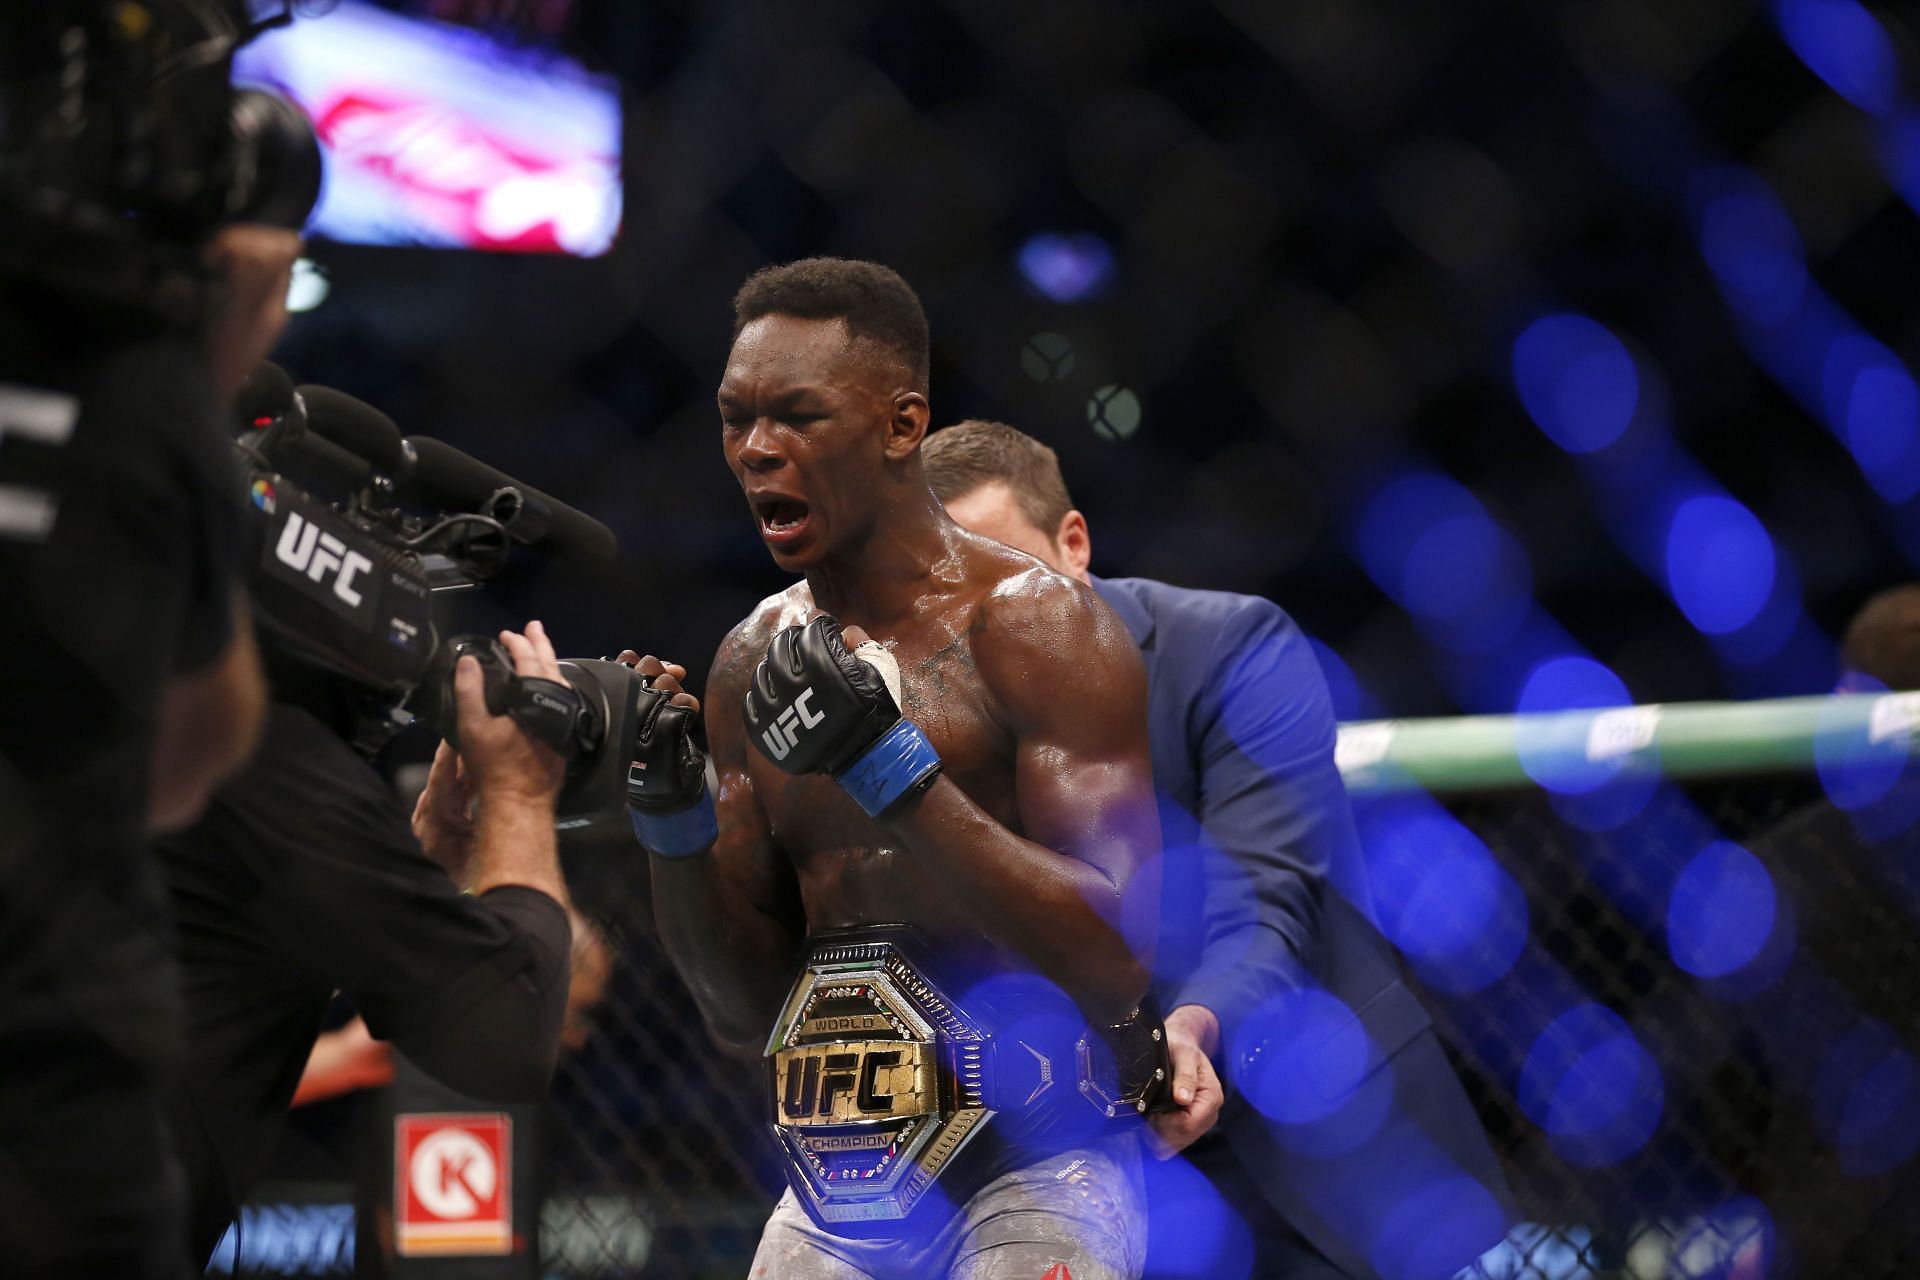 Could the UFC let Israel Adesanya attempt to avenge his loss to Alex Pereira - and have them coach on TUF?